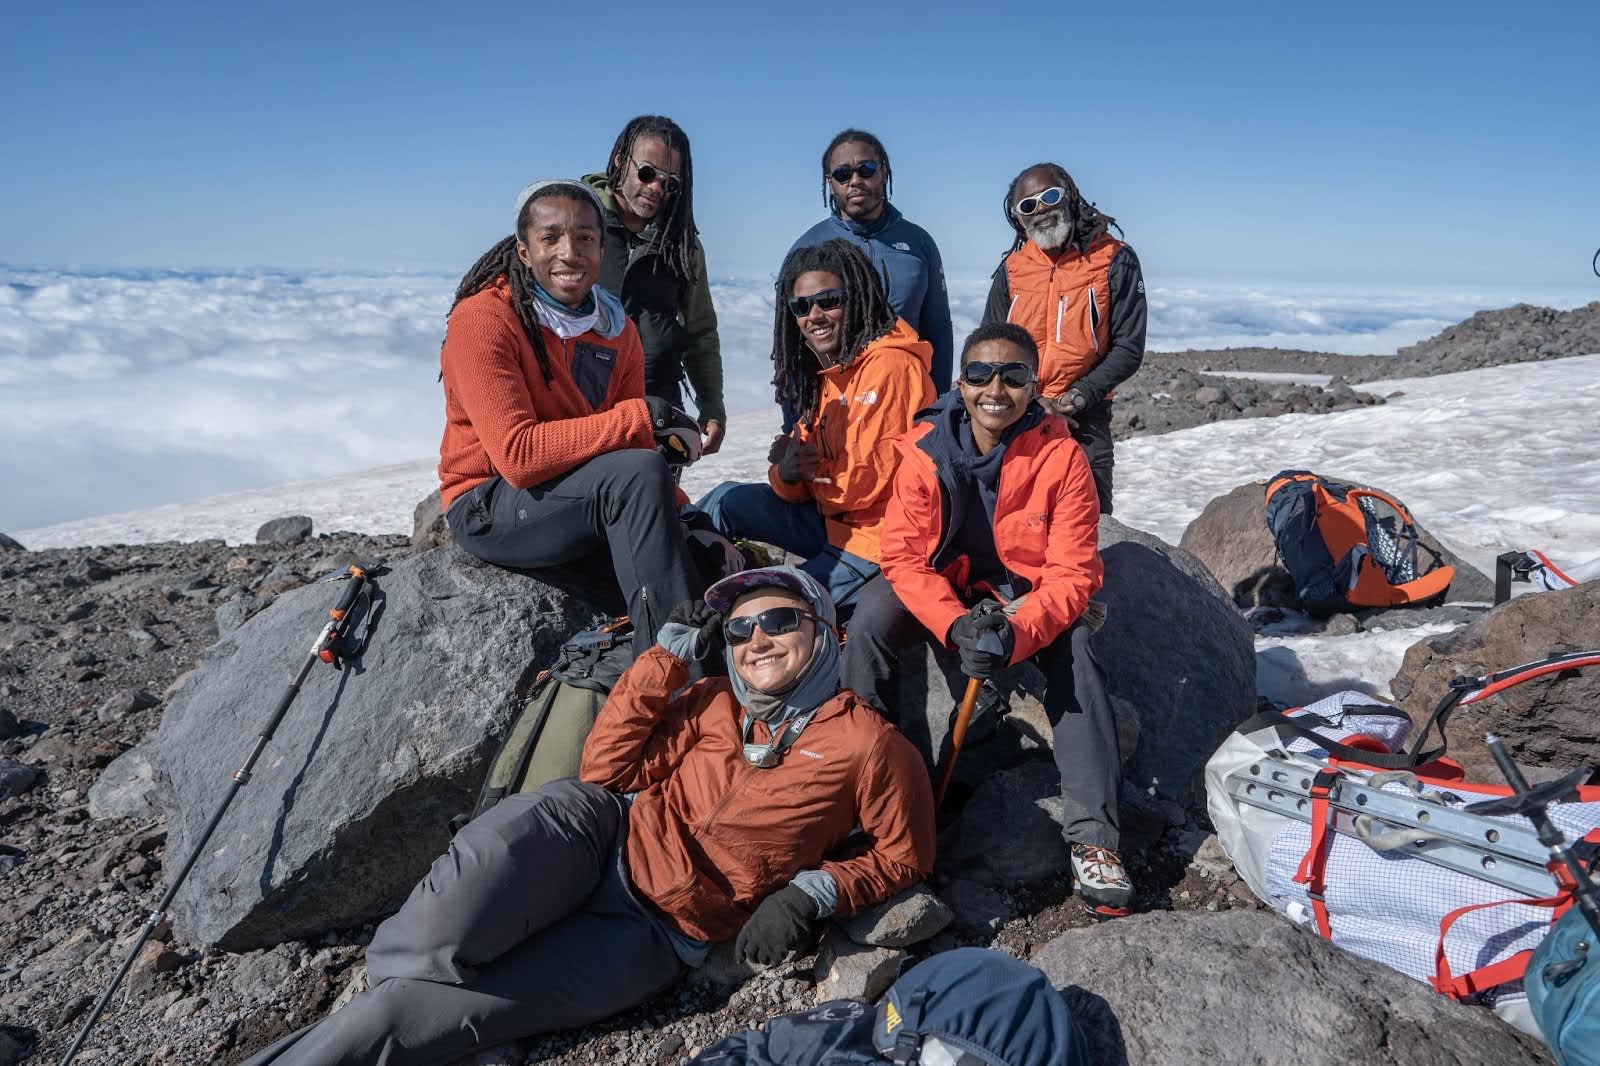 Fewer than 10 Black climbers have summitted Mount Everest — meet the team hoping to change that